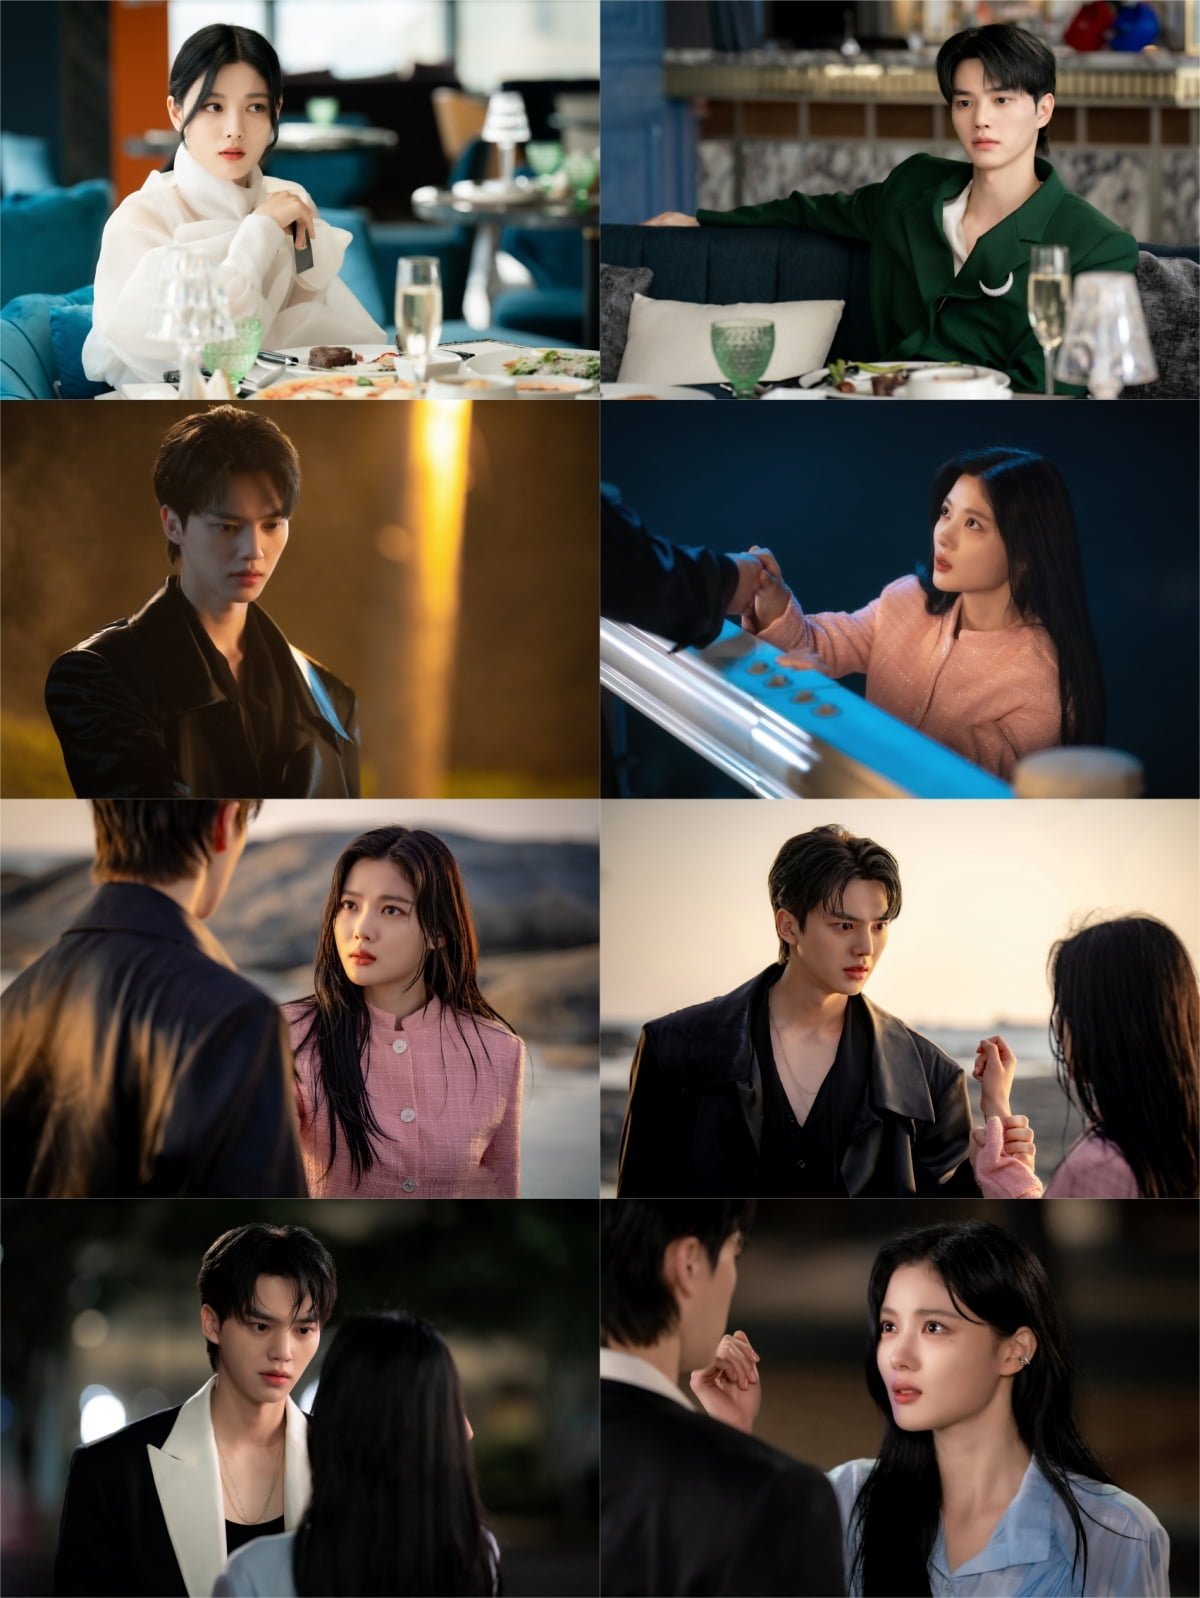 “My Demon” Captivates Viewers with Intriguing Romance and Fantasy